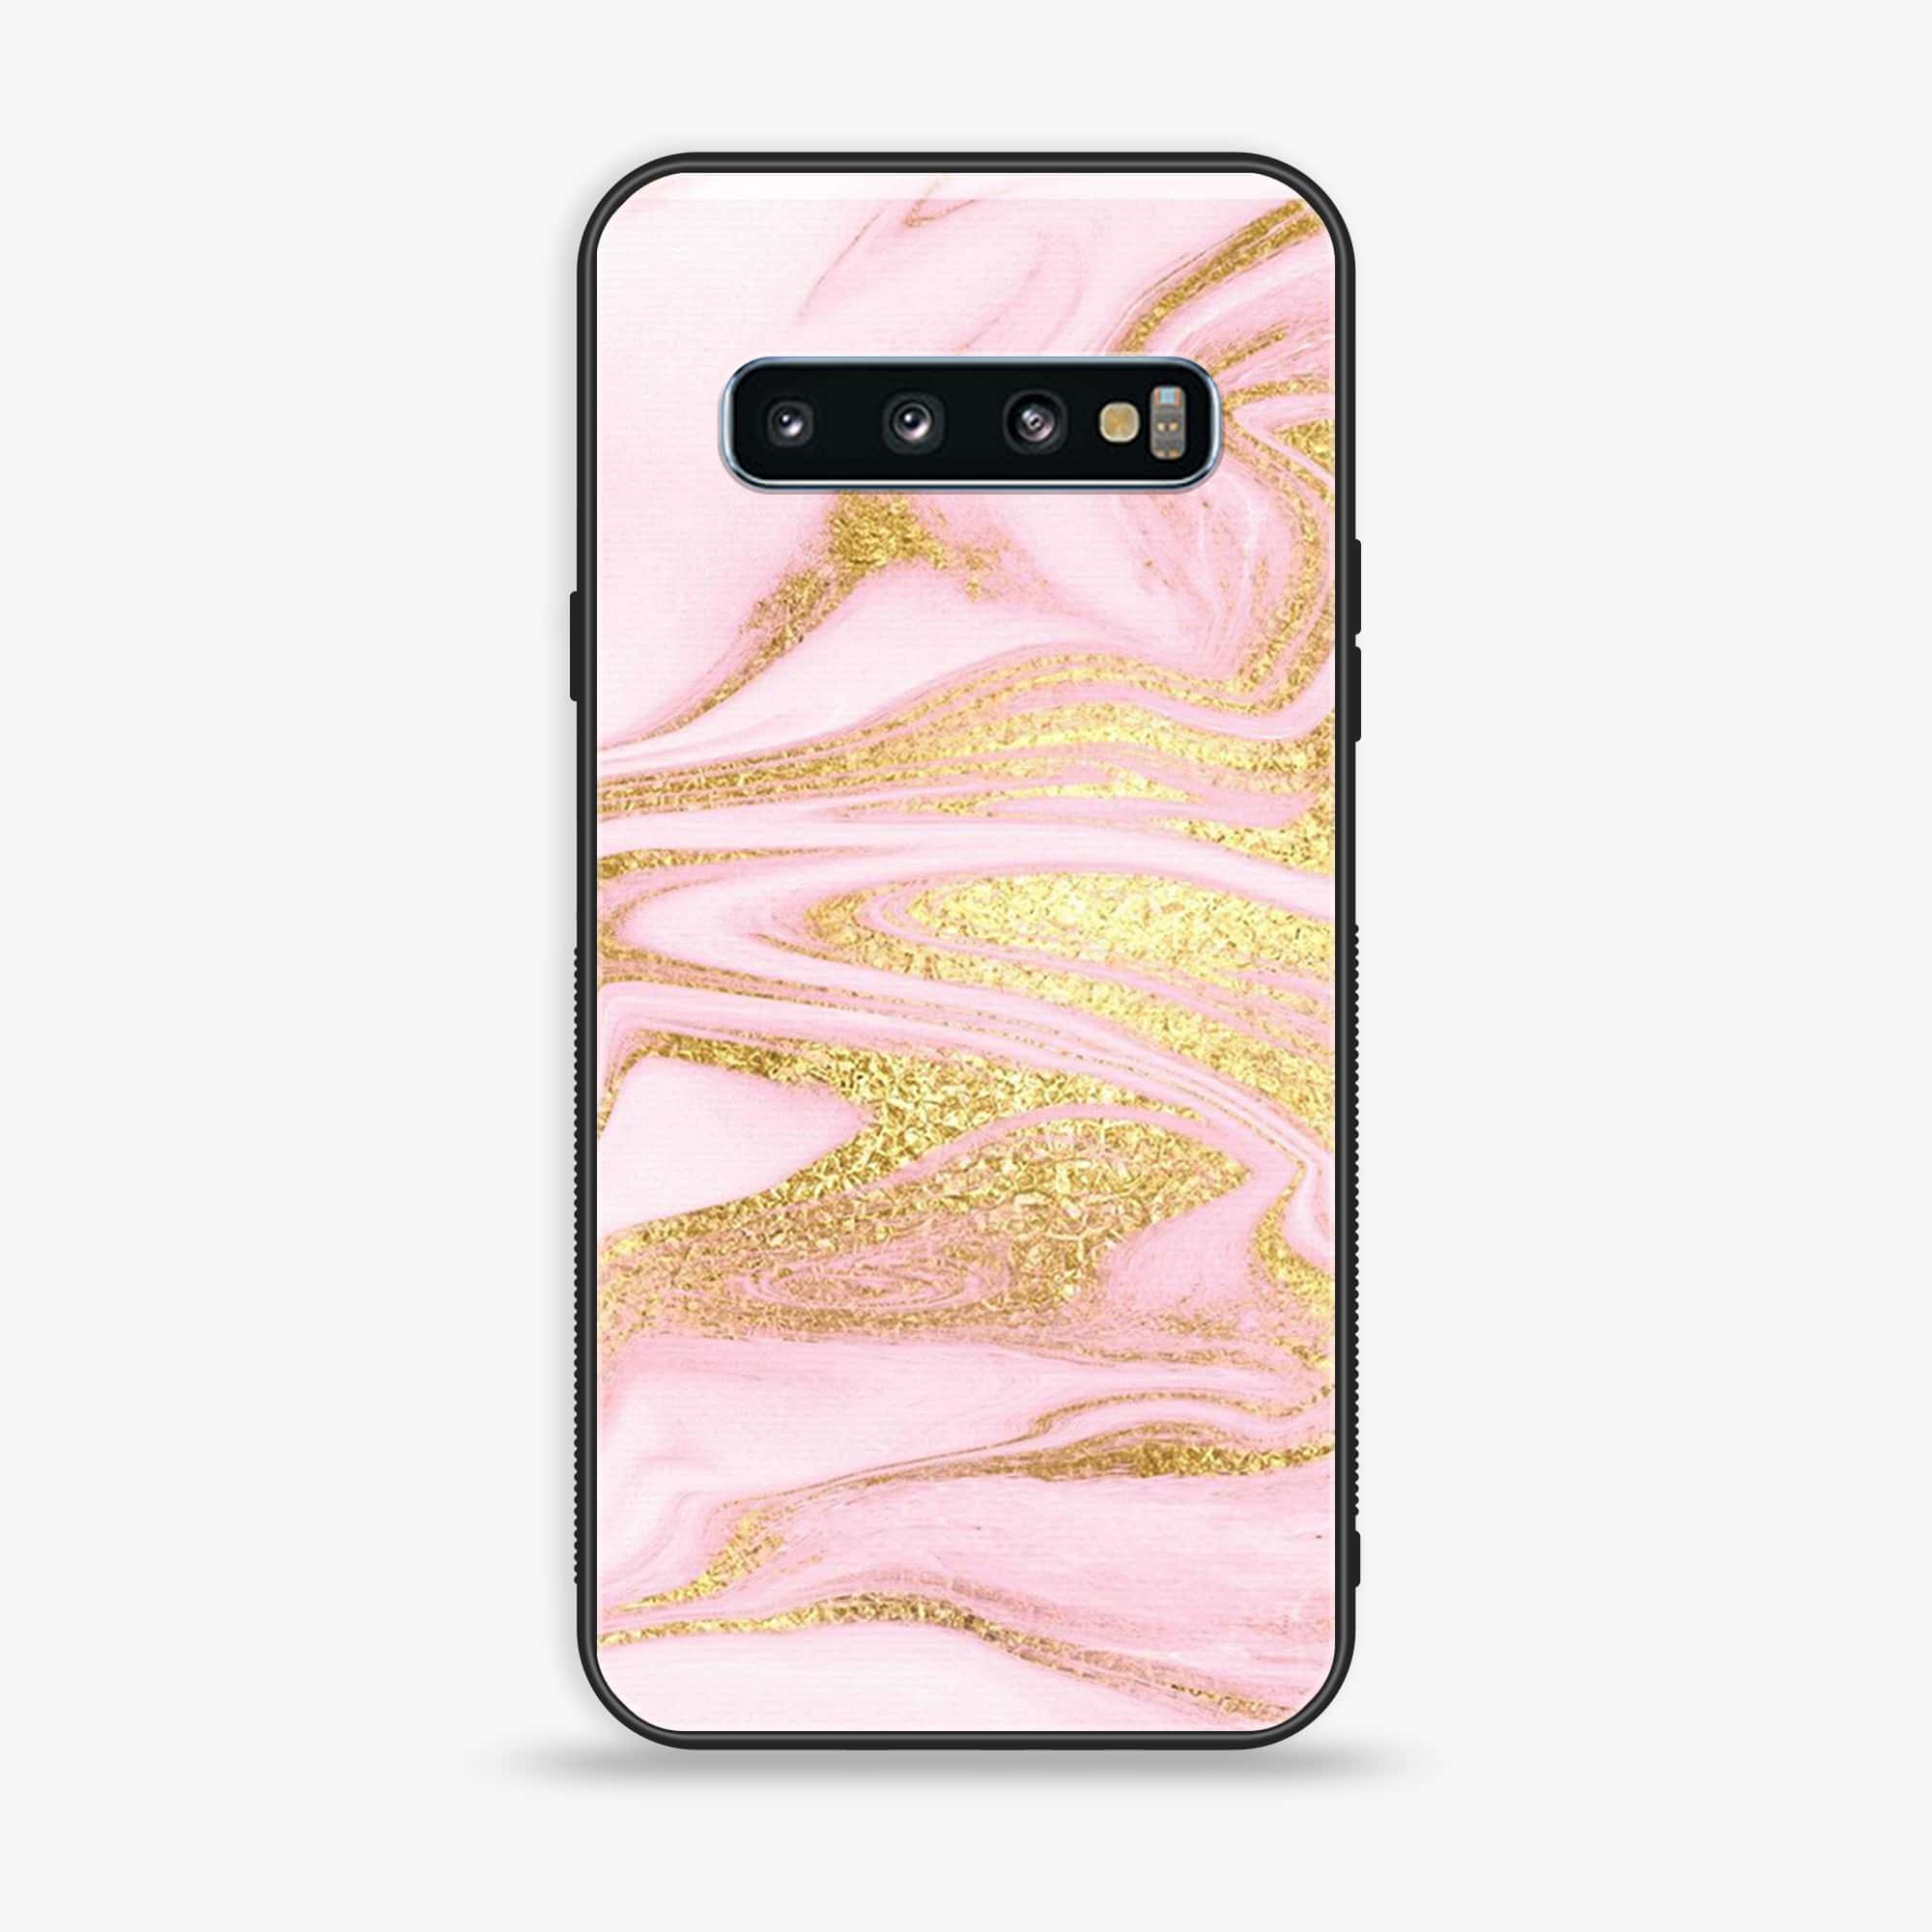 Samsung Galaxy S10 - Pink Marble Series - Premium Printed Glass soft Bumper shock Proof Case